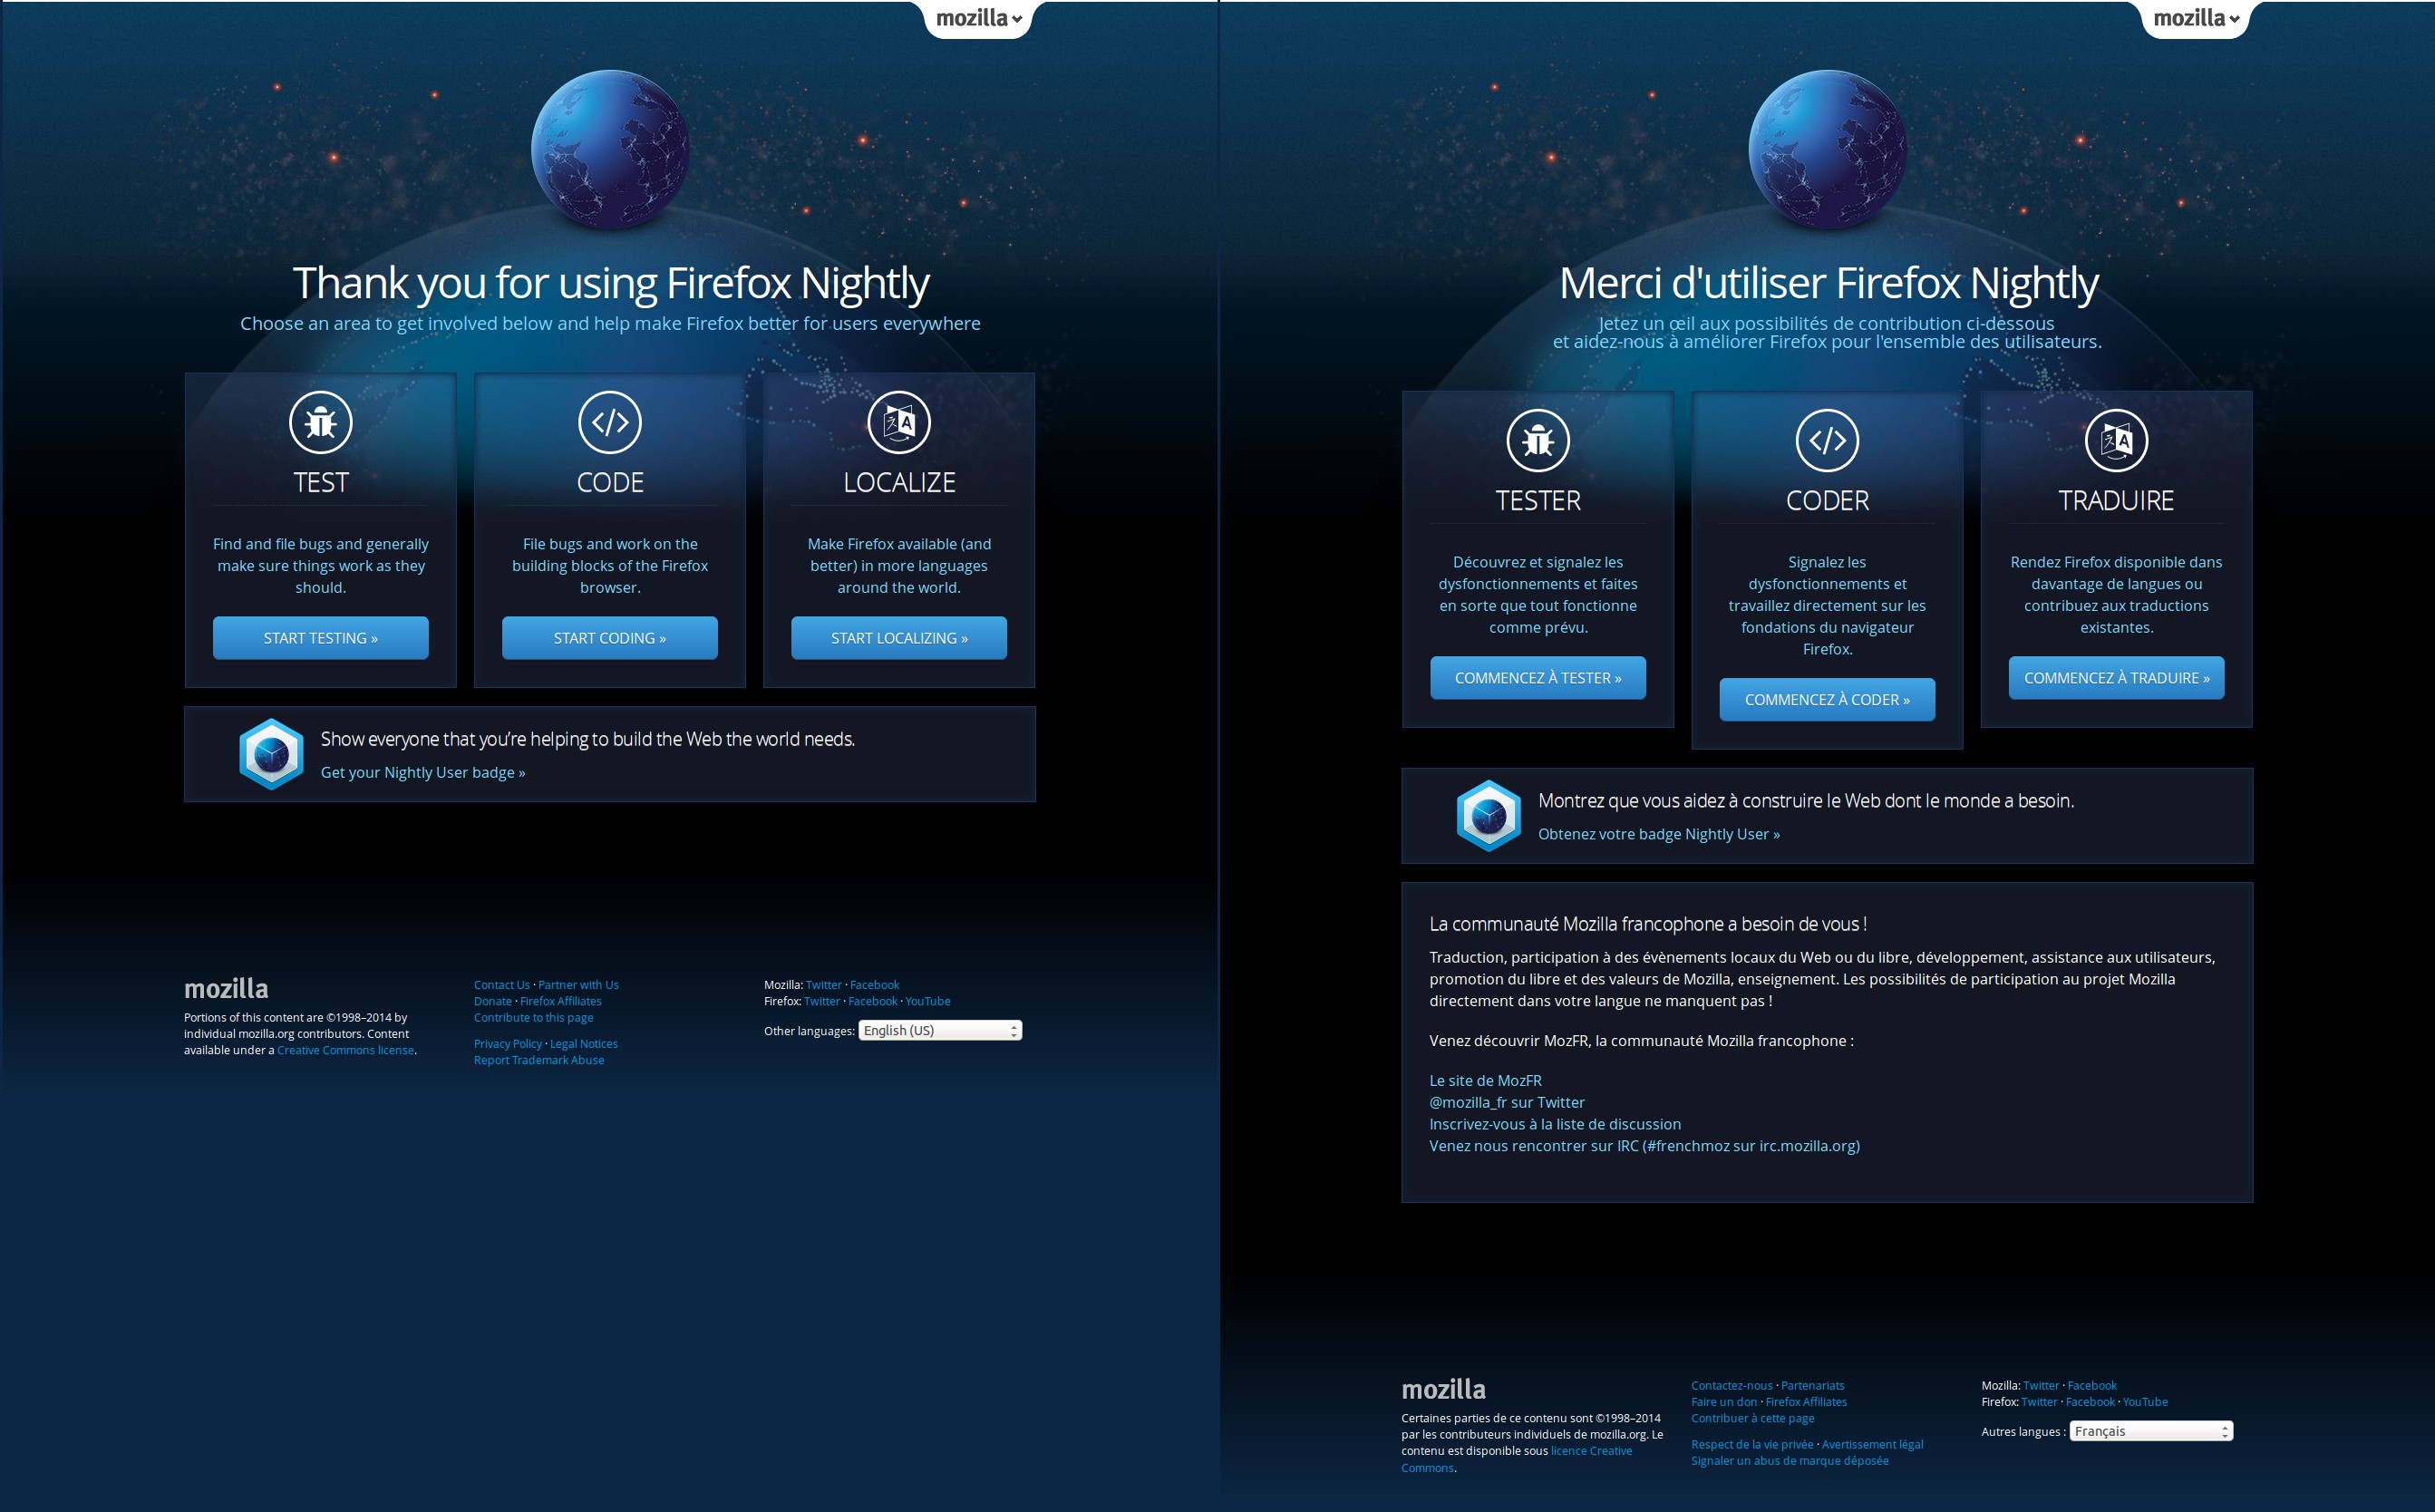 New Firefox Nightly firstrun page